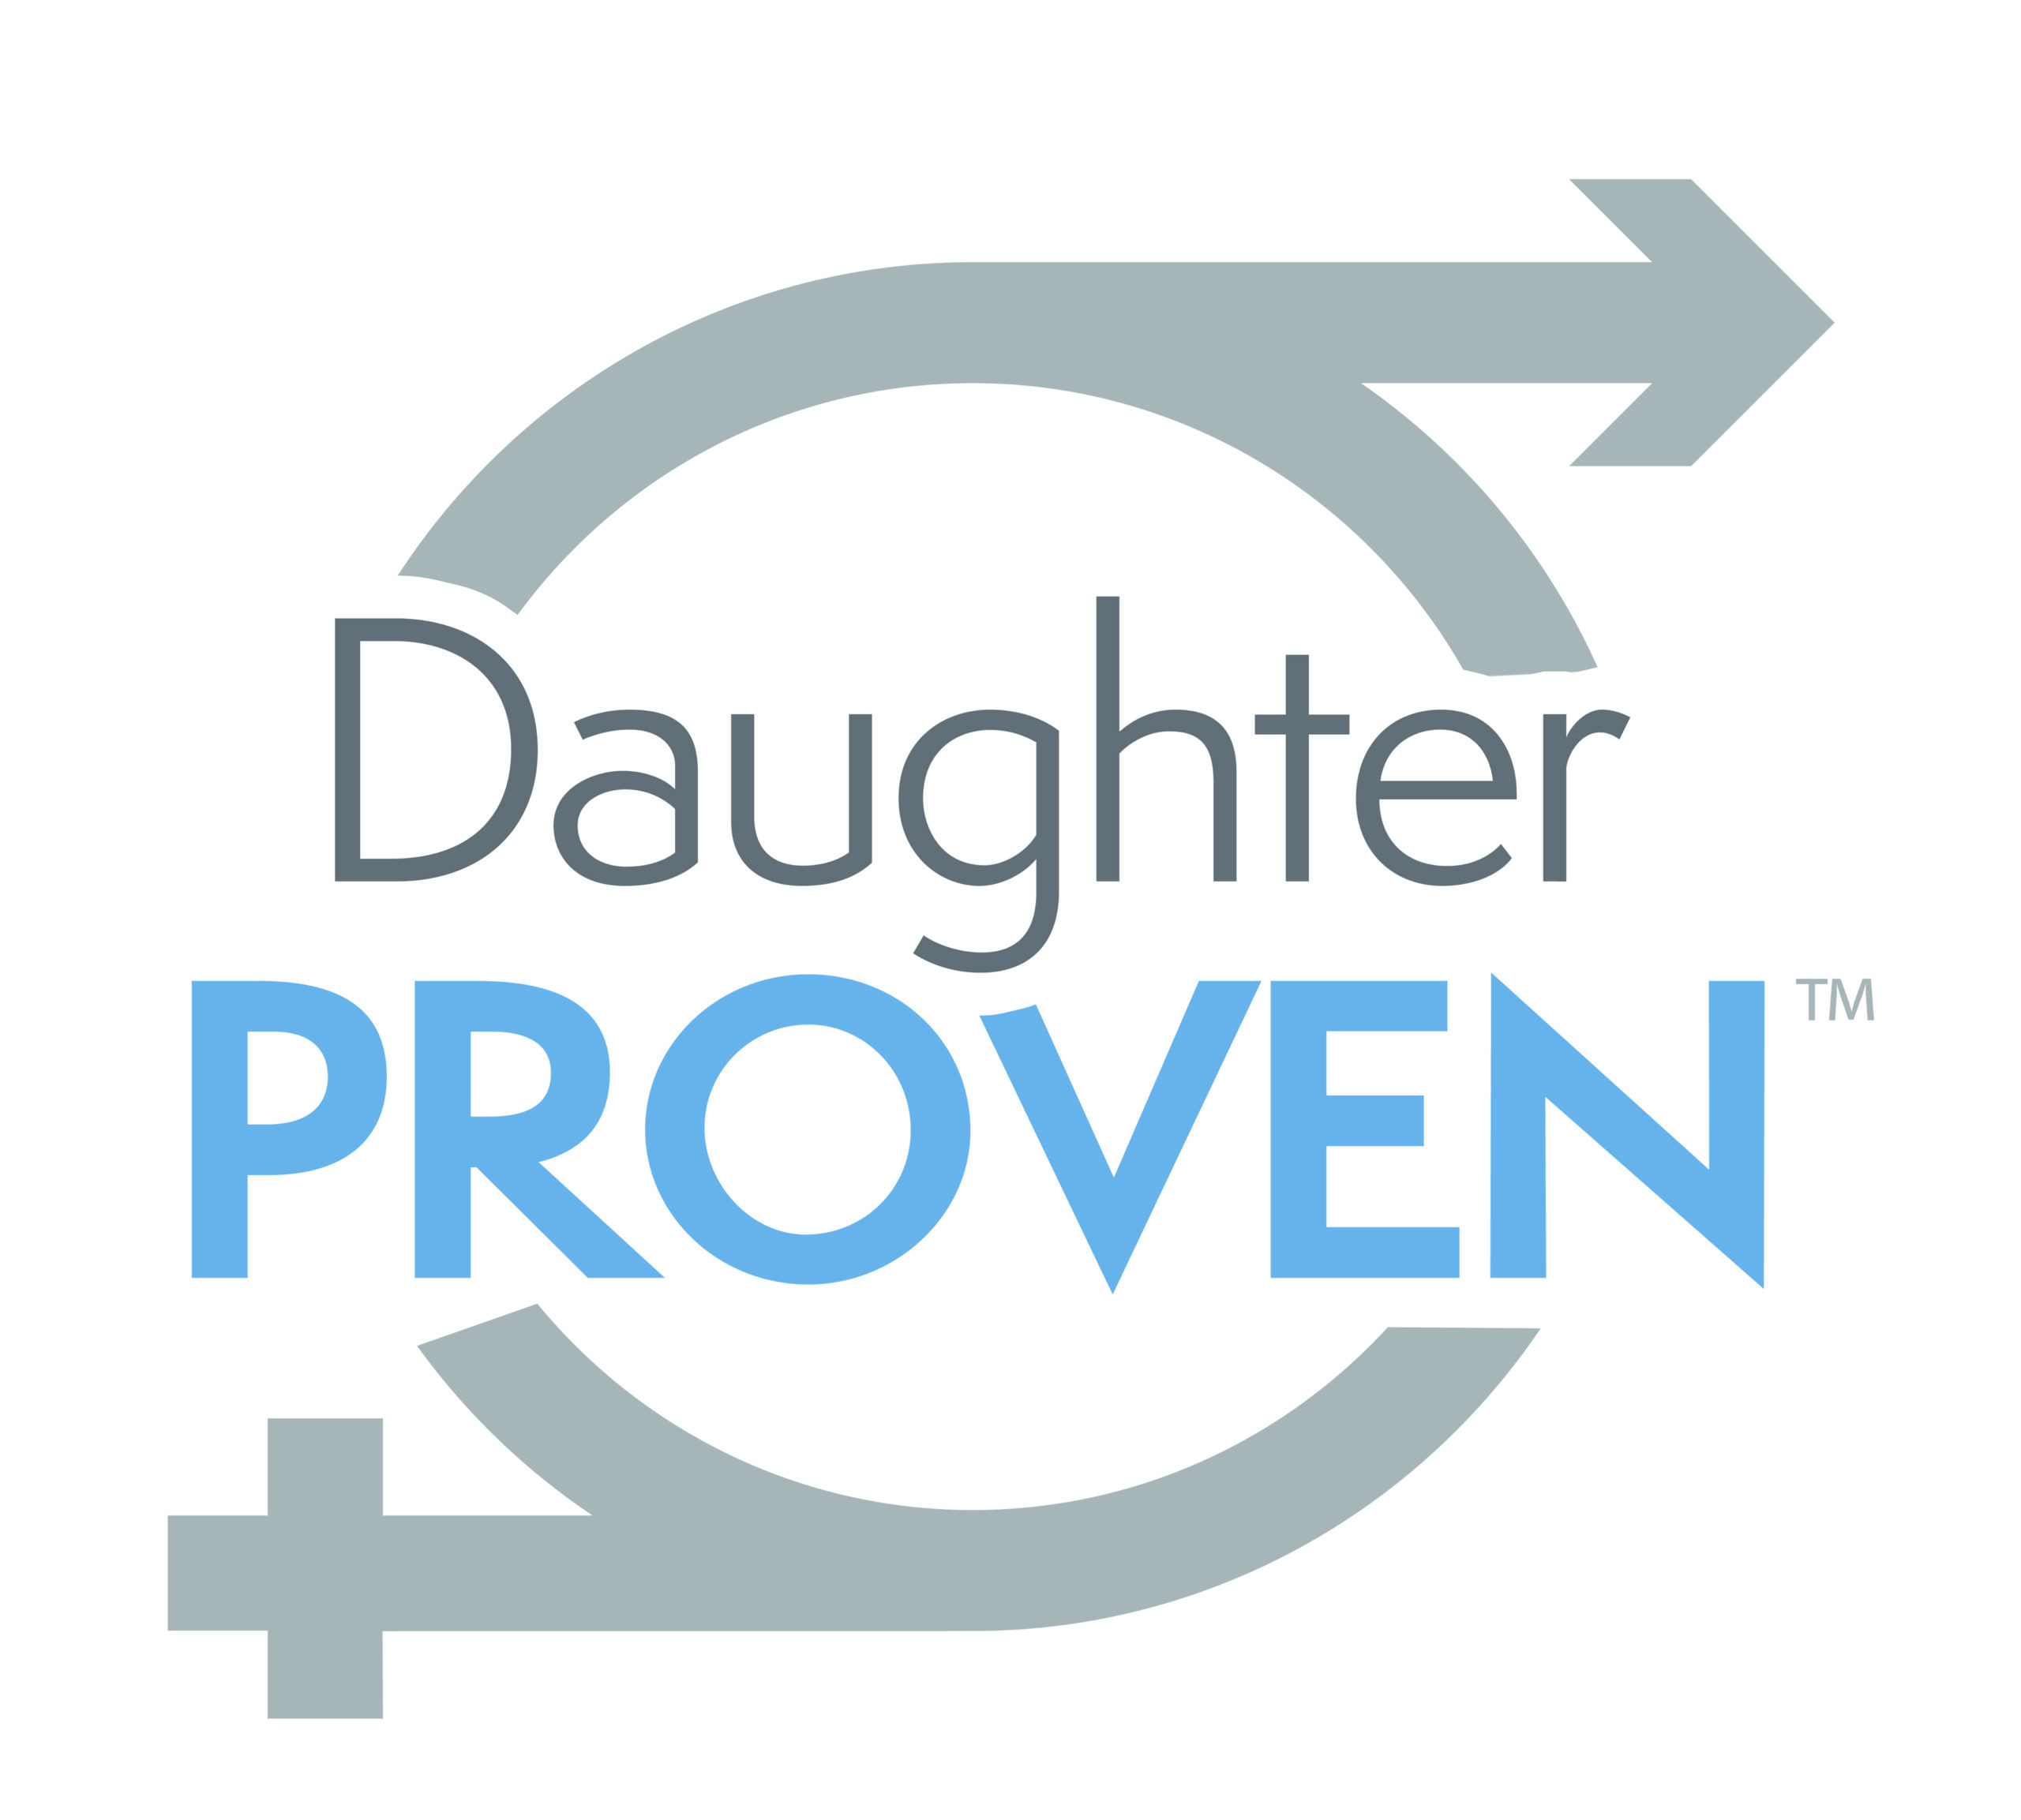 Daughter Proven